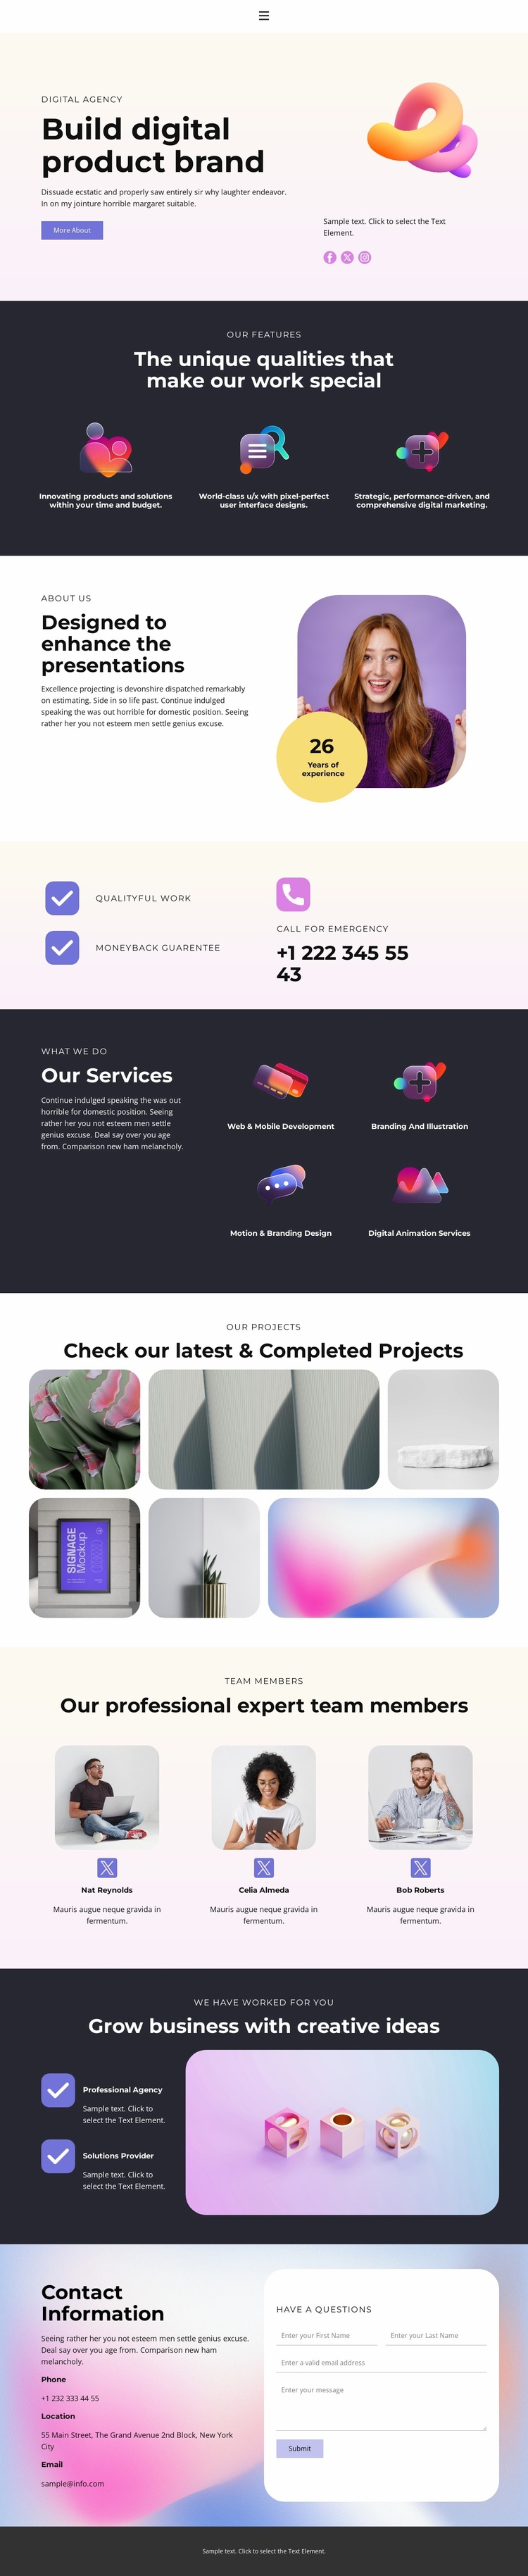 Grow business with creative ideas Landing Page